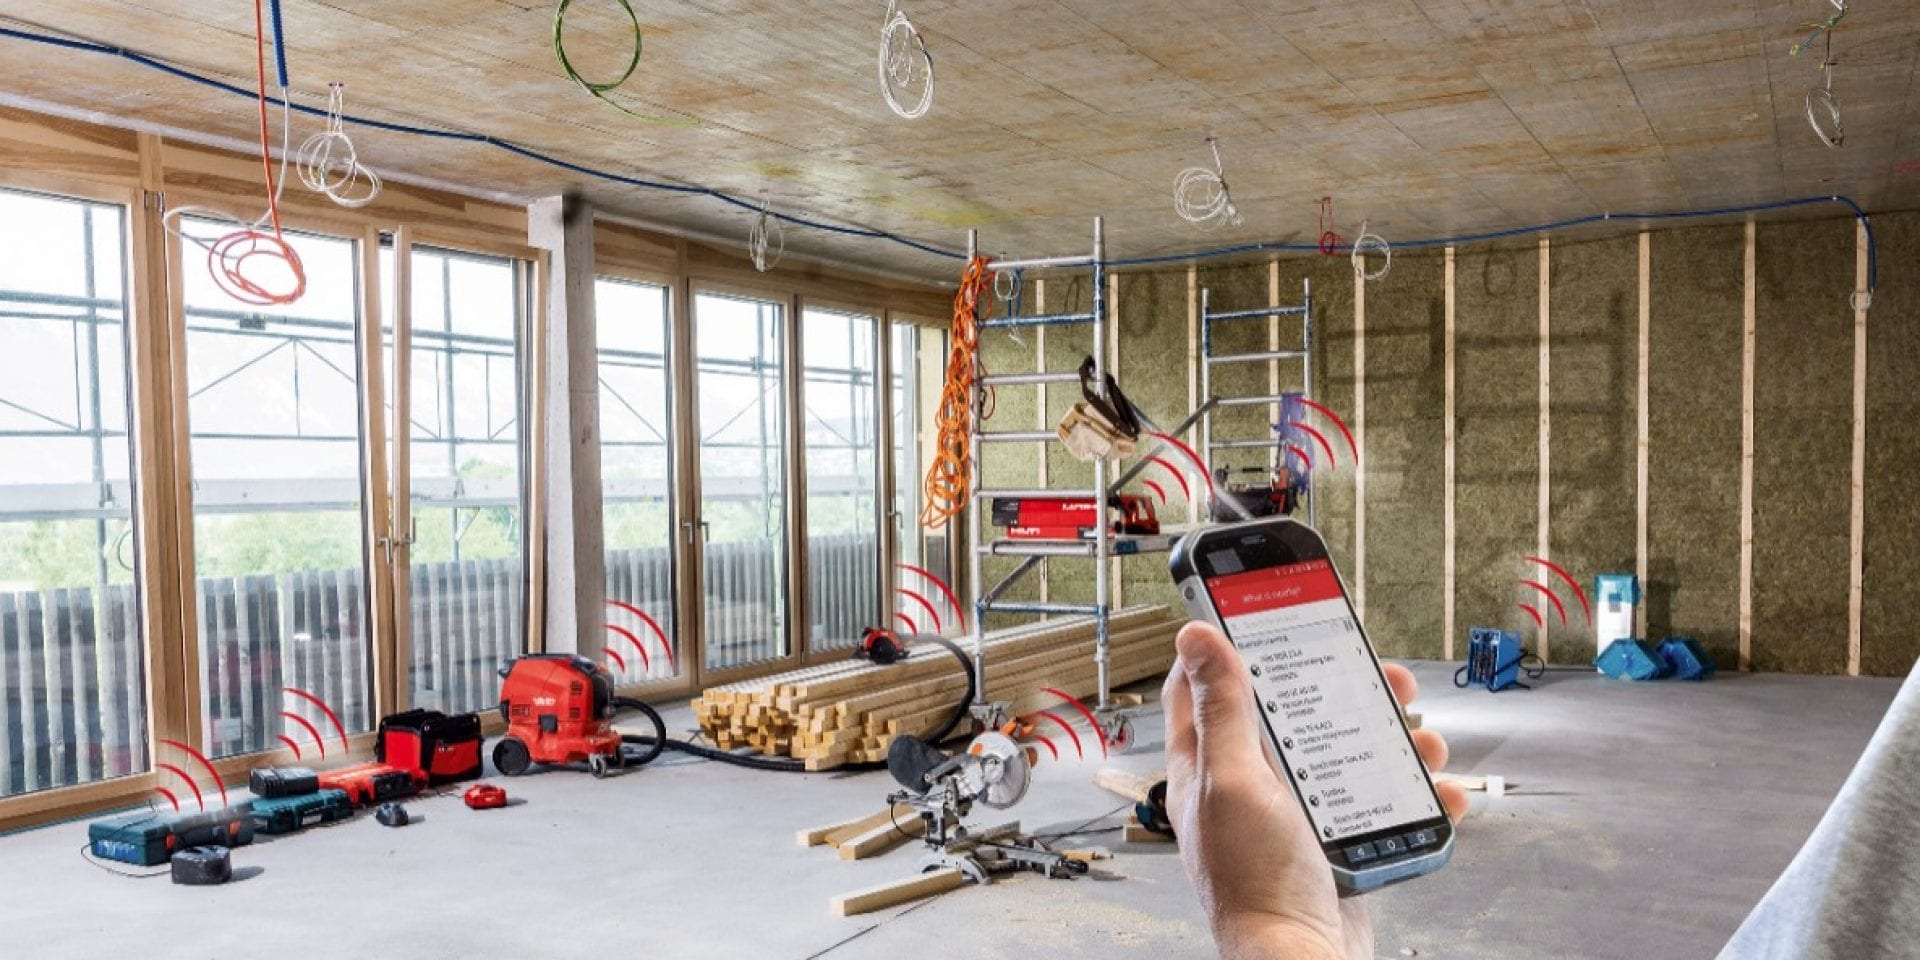 With the introduction of Active Tracking with Bluetooth technology, Hilti’s ON!Track asset management system is set to bring major new savings and efficiencies to the construction industry.